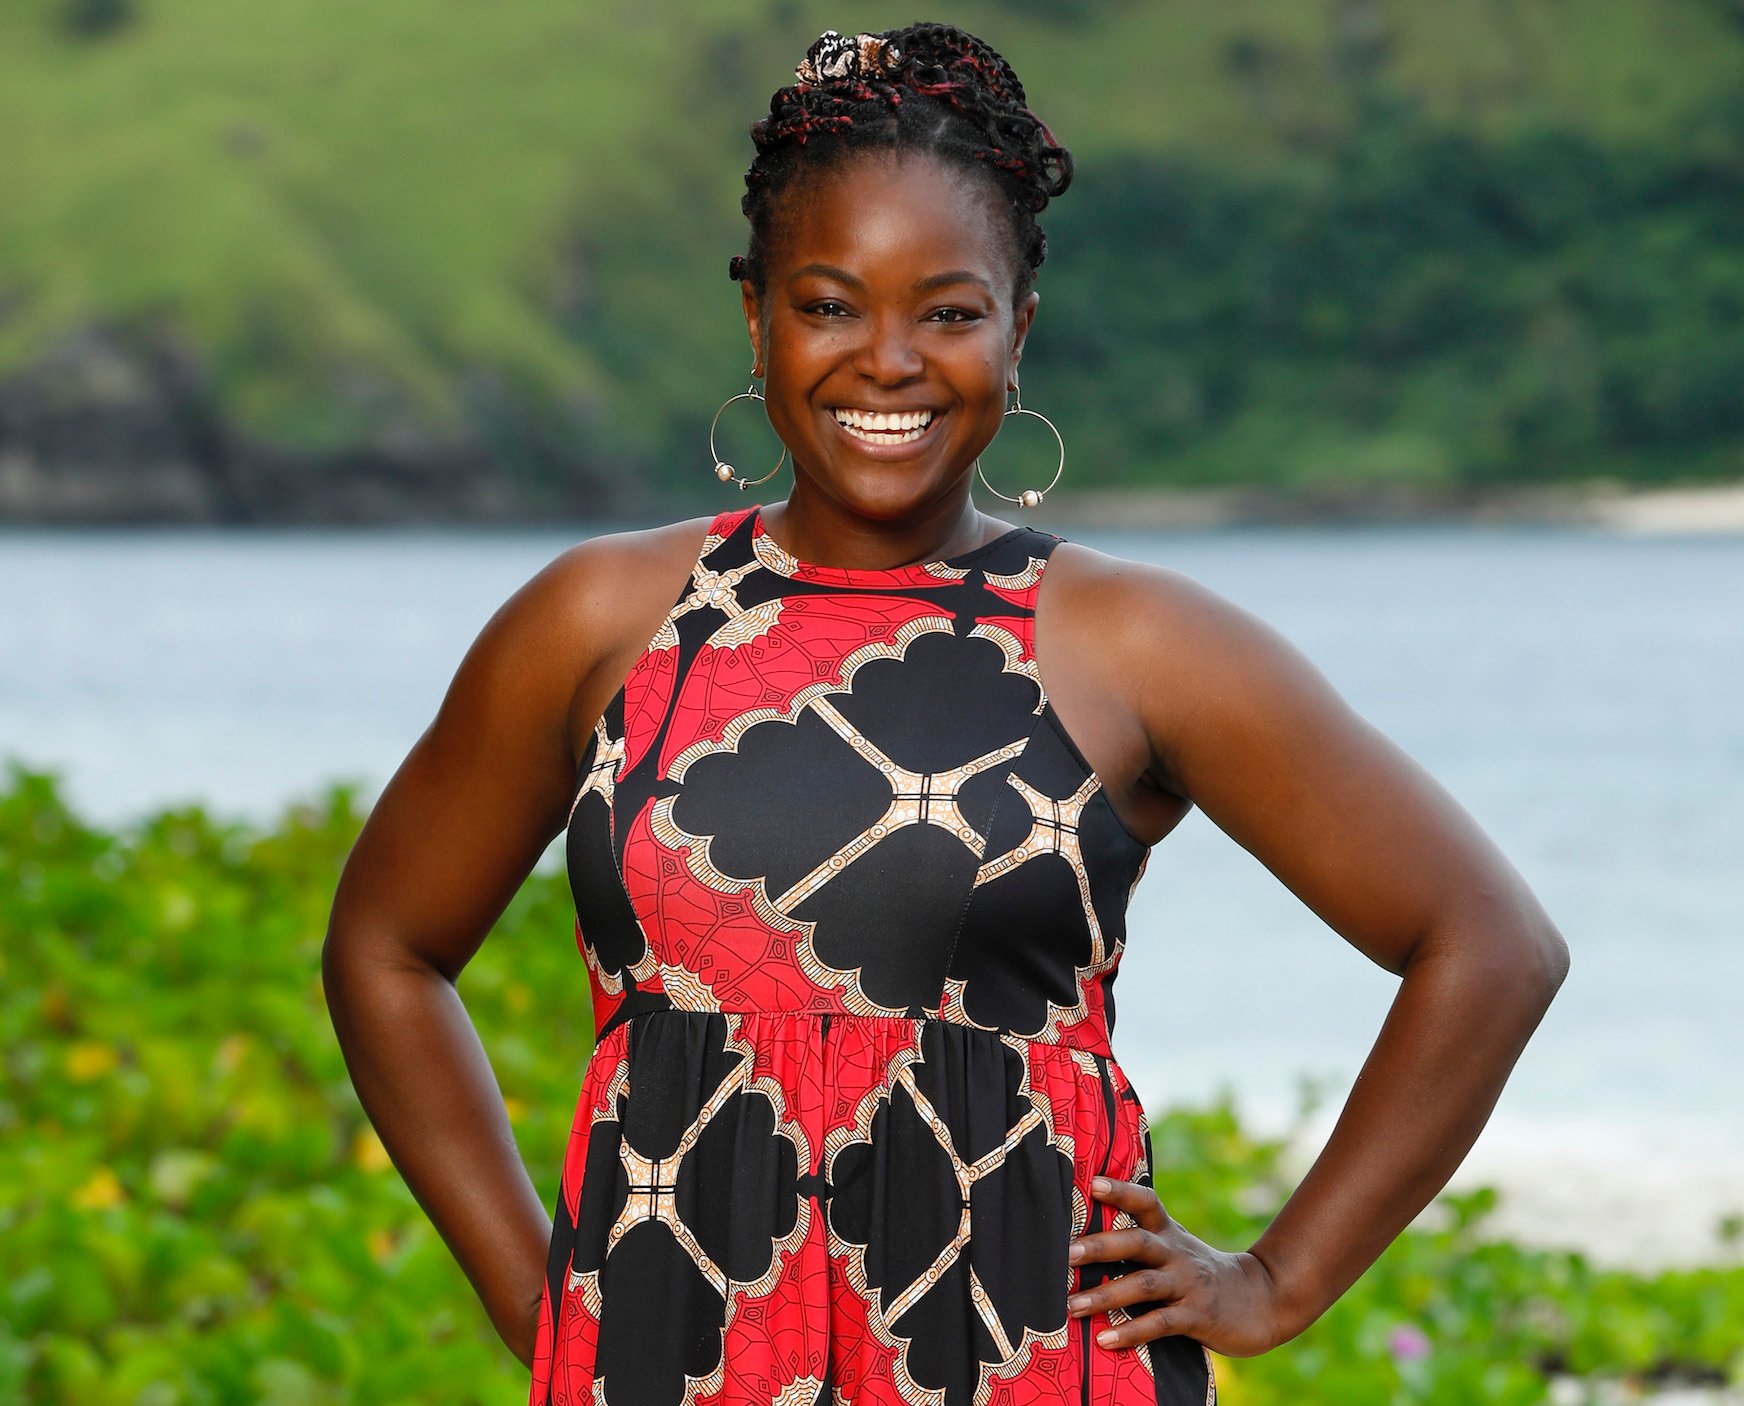 Nneka Ejere poses in a red and black dress on the beach for 'Survivor' Season 43.